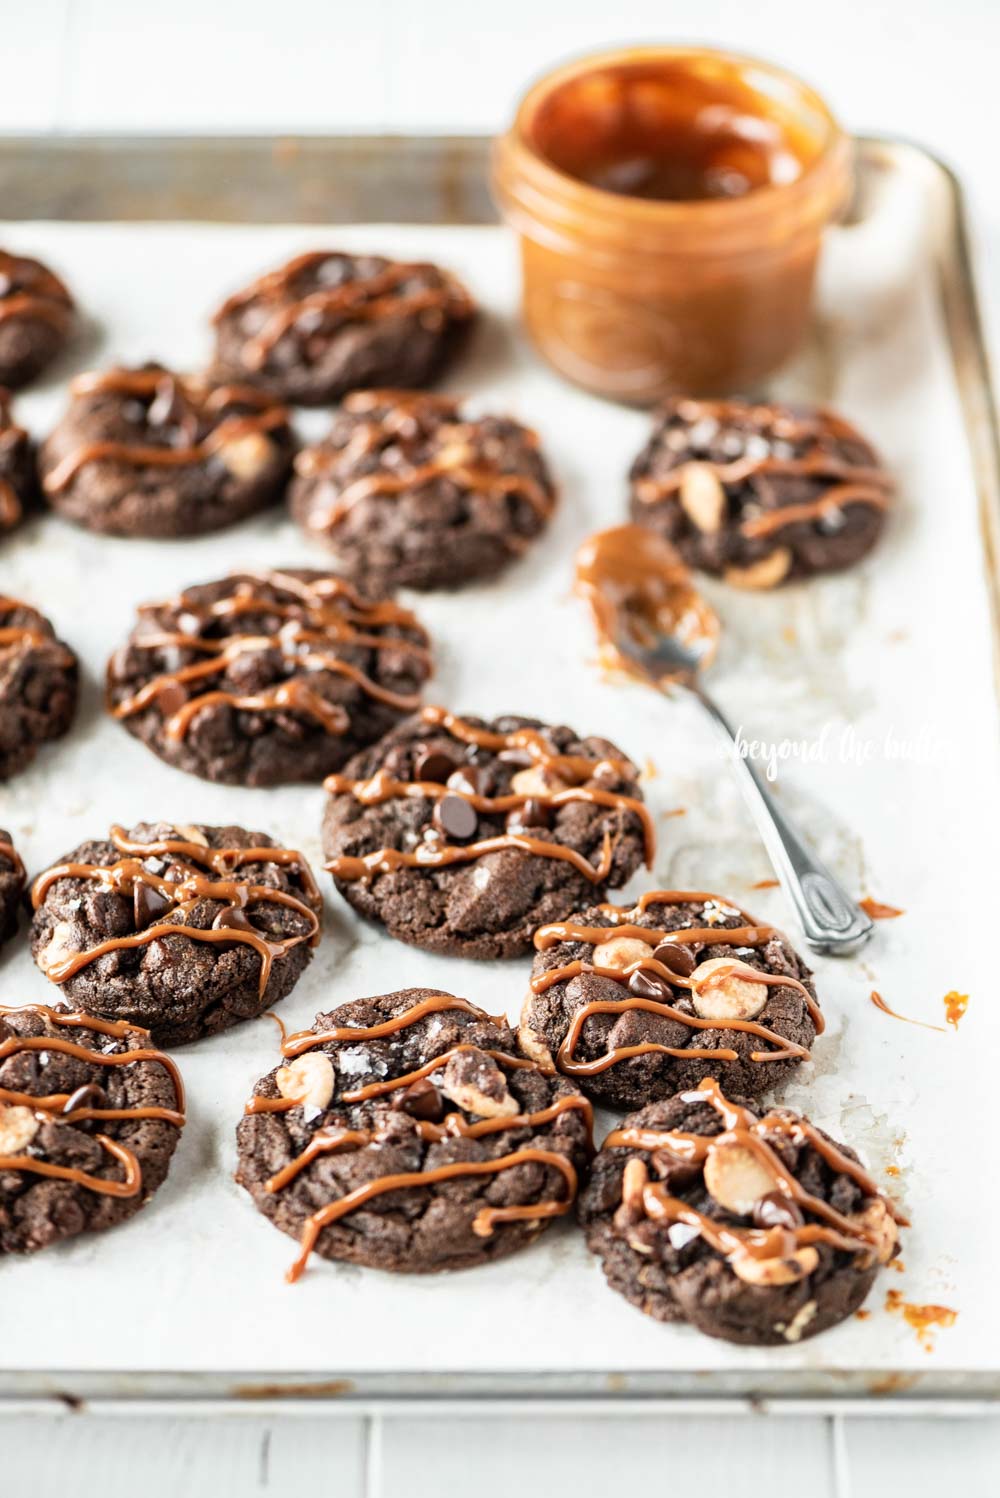 Overhead image of just baked double chocolate salted caramel cookies on a baking sheet with a spoon and jar of a caramel sauce resting close by | All Images © Beyond the Butter™